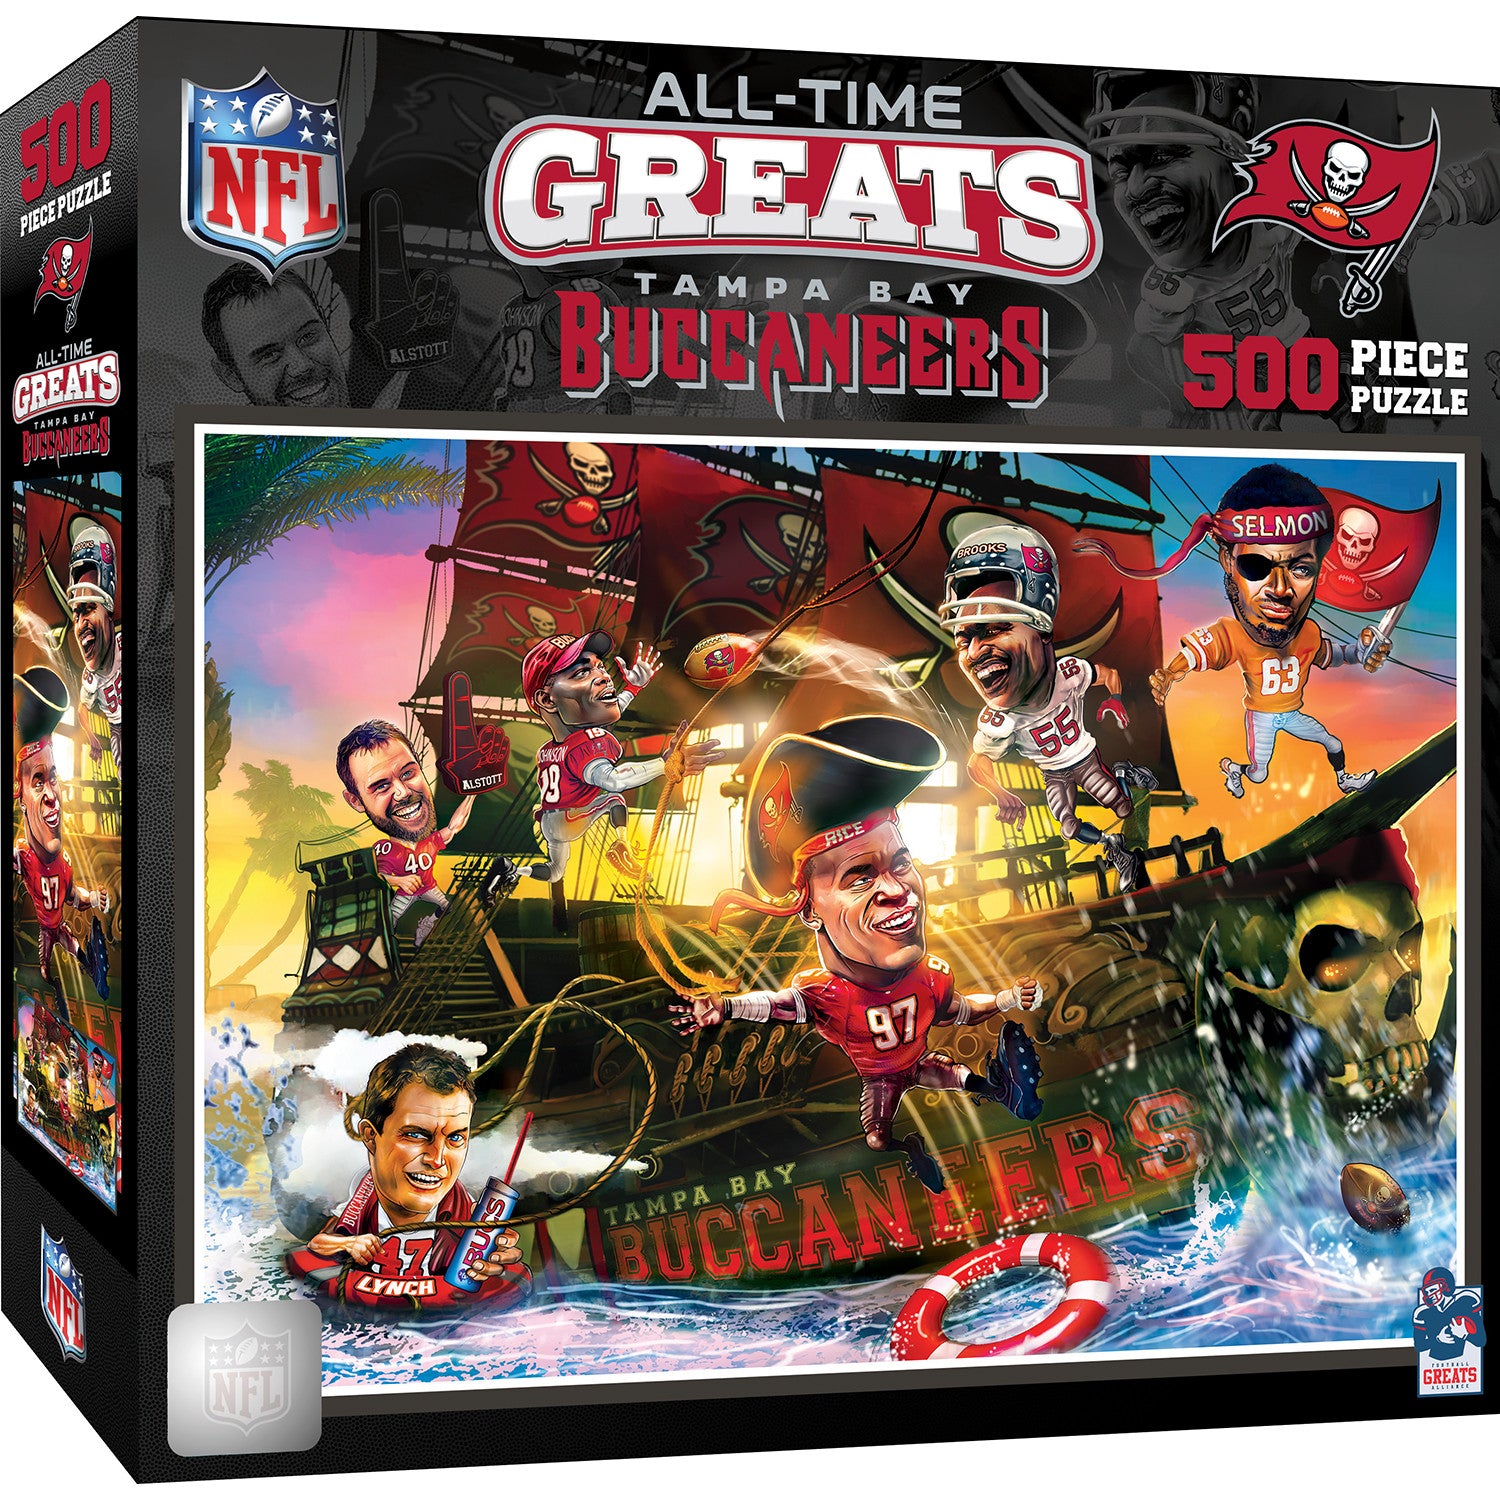 Tampa Bay Buccaneers - All Time Greats 500 Piece Puzzle